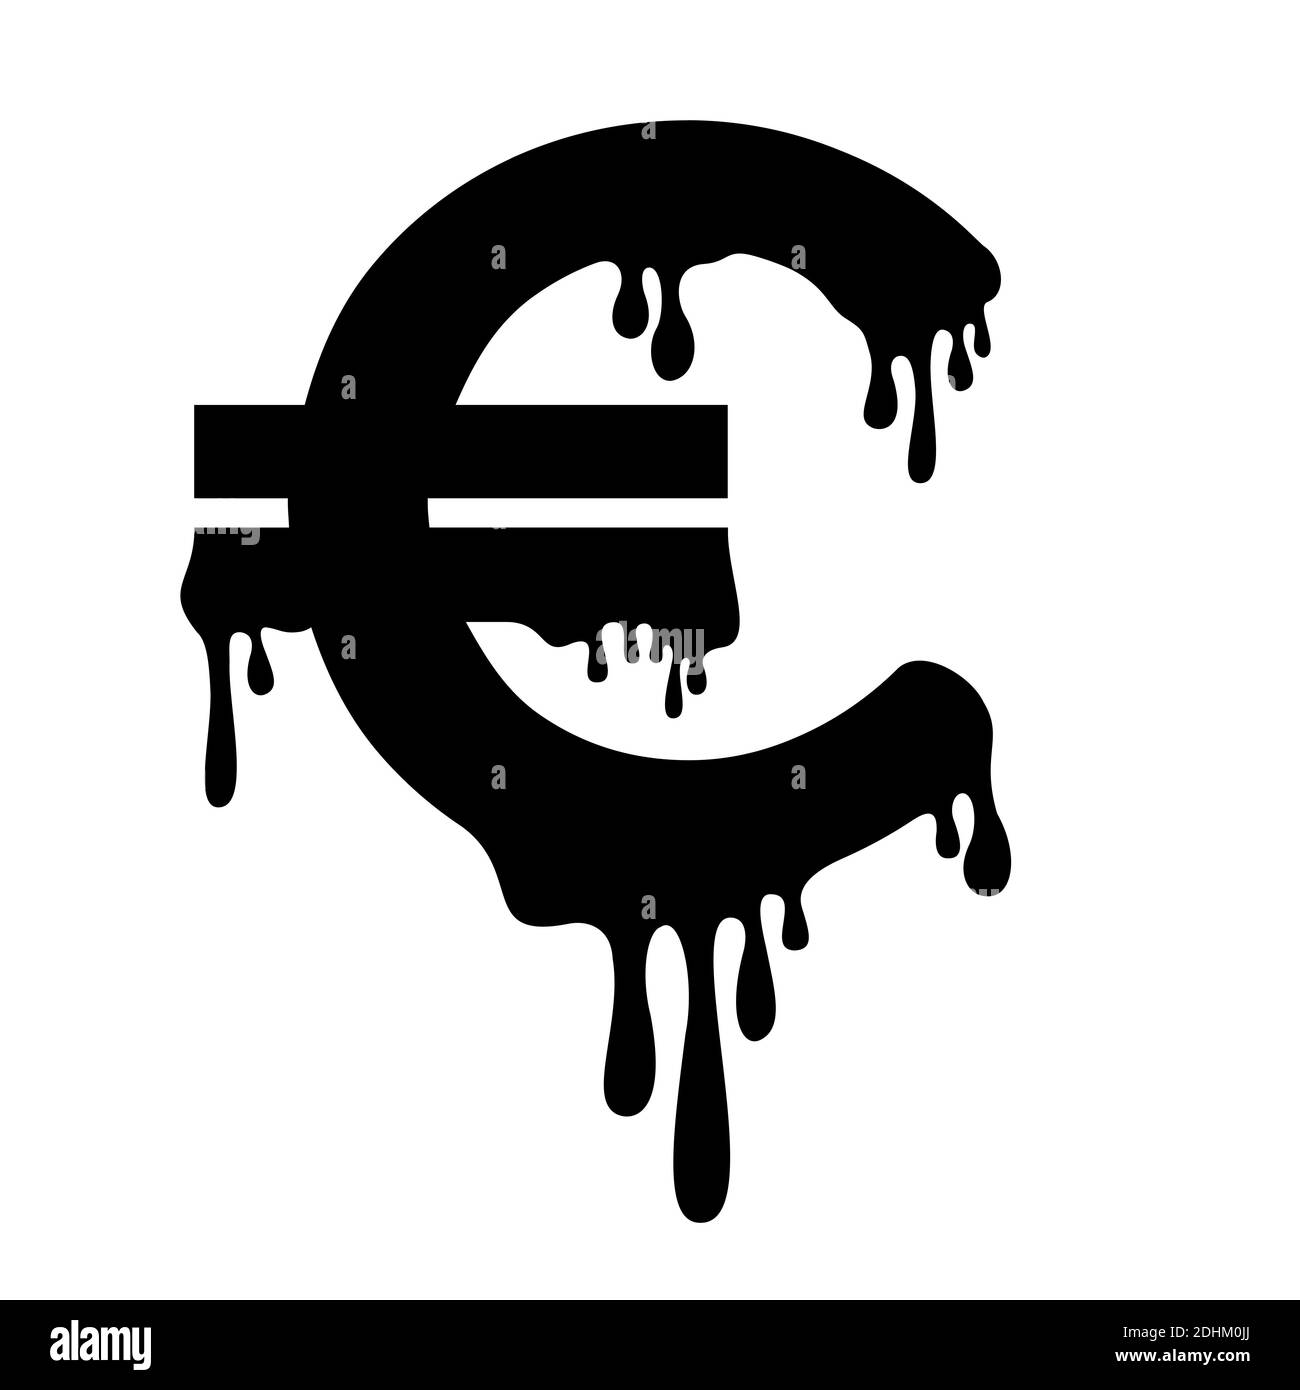 Euro is melting - economical collapse and breakdown of currency of European union - recession, inflation, loss of value, financial crisis of EU and Eu Stock Photo